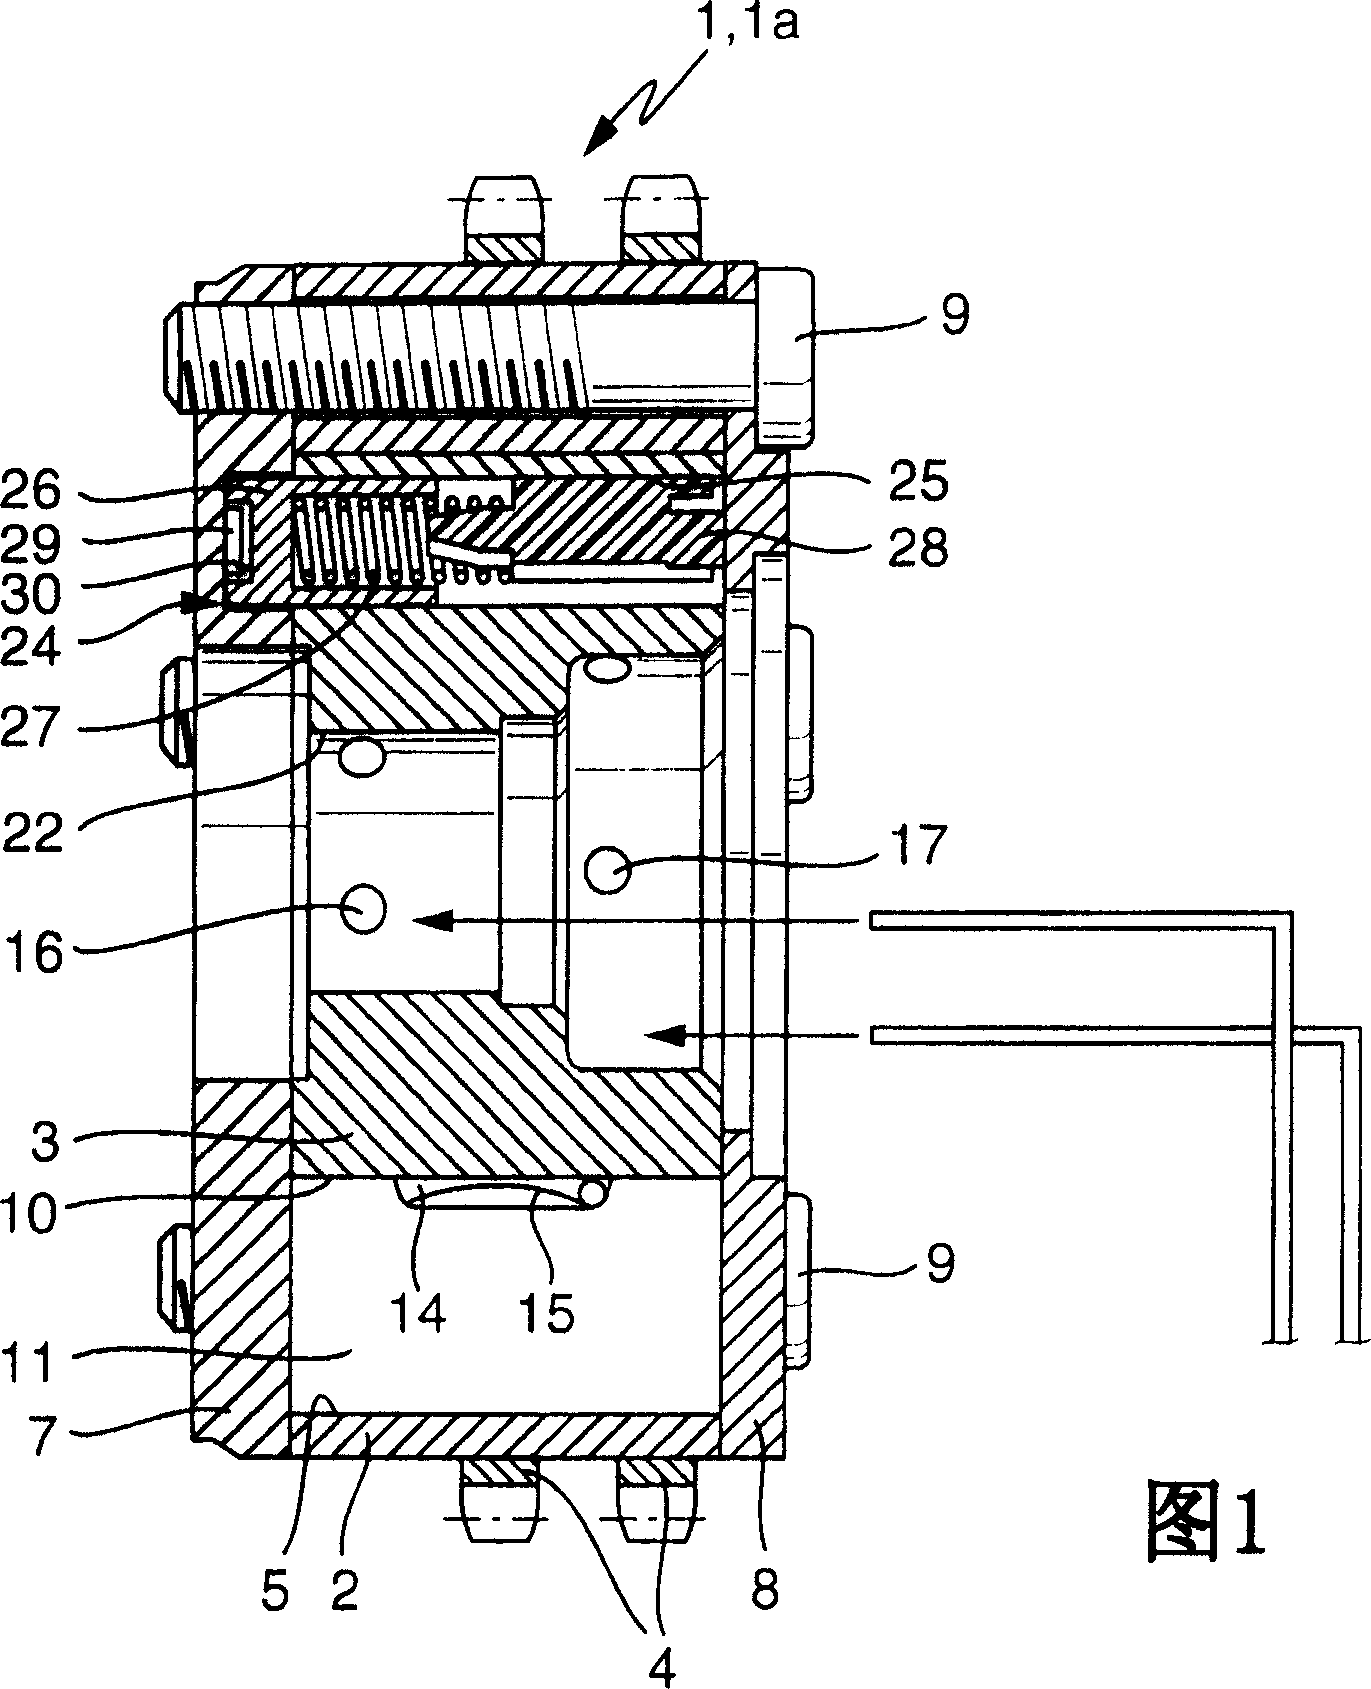 Device for altering the valve timing in an internal combustion engine